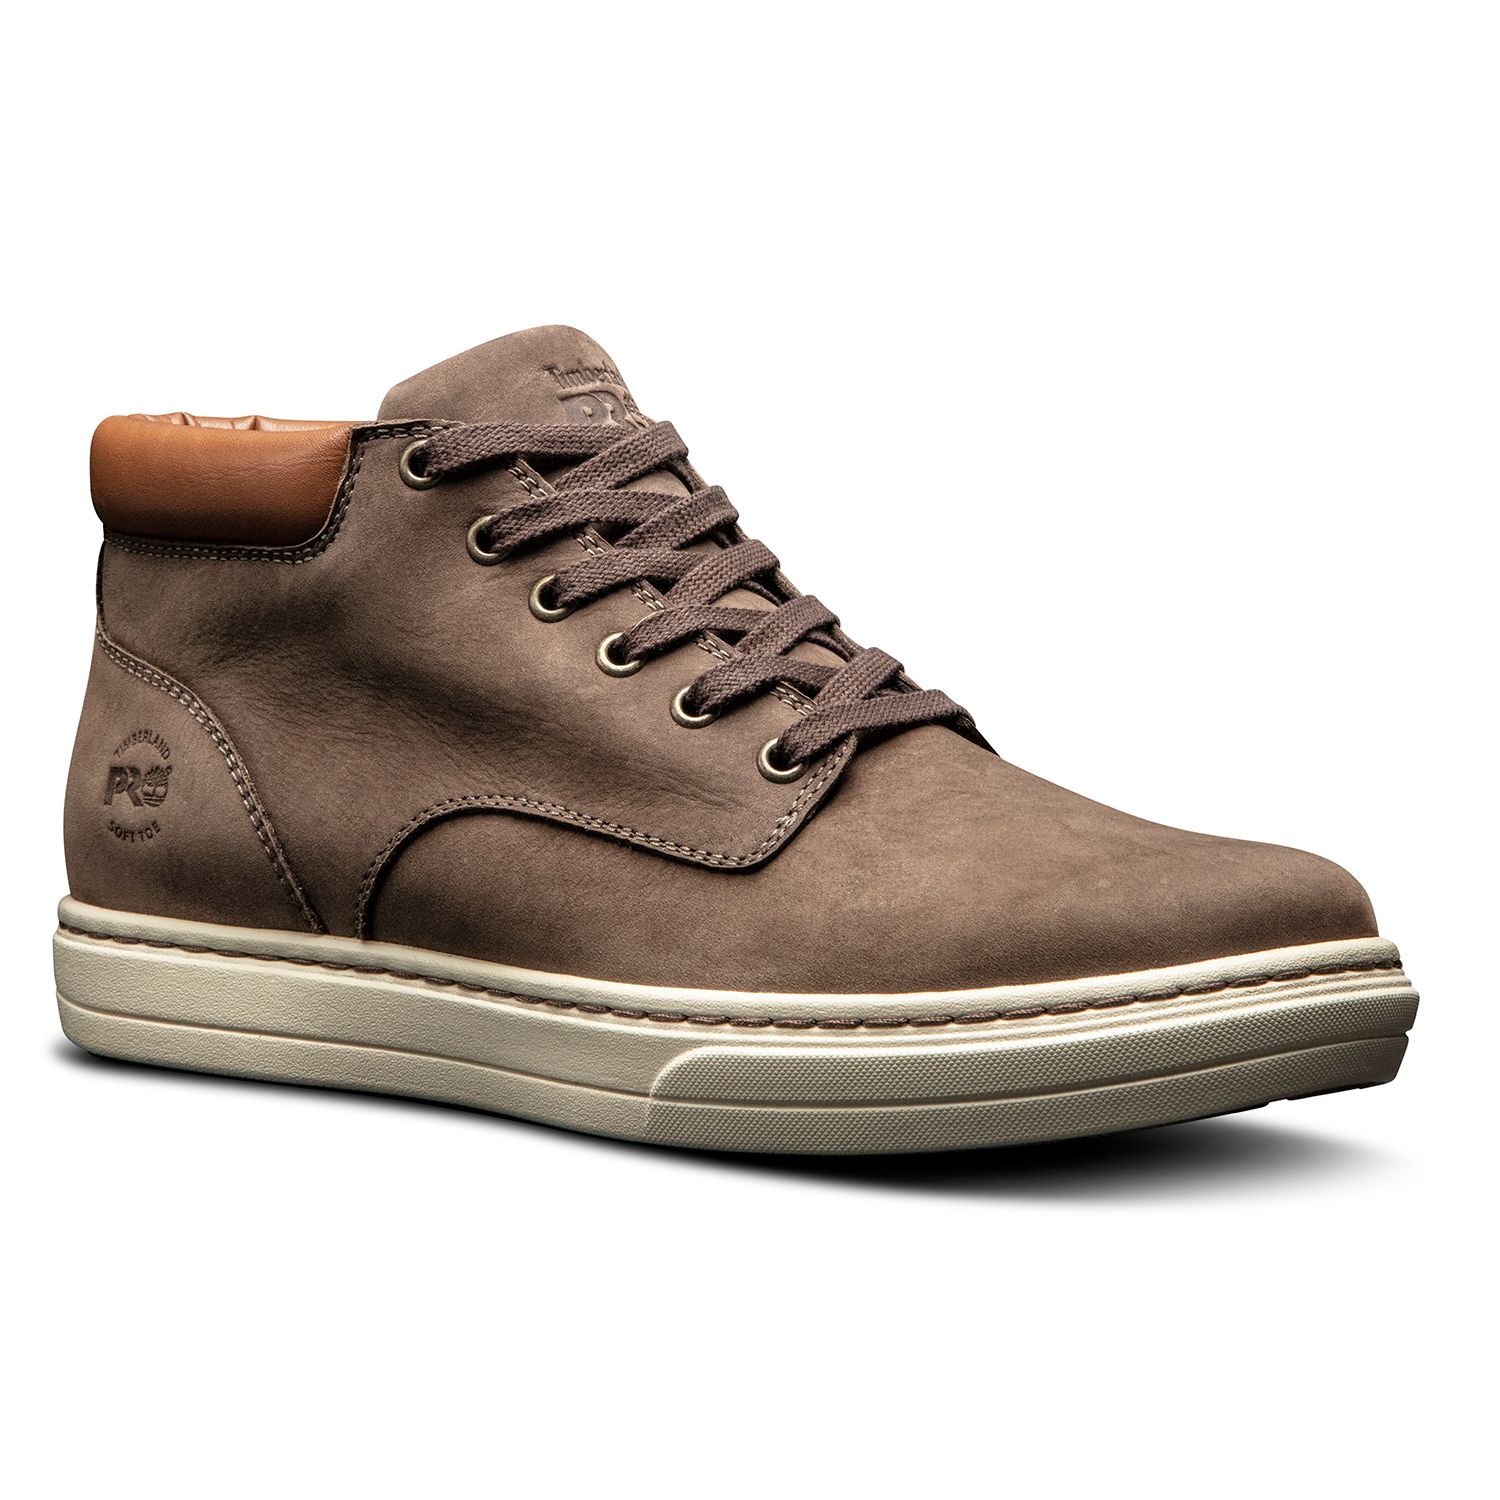 timberland pro men's work shoes